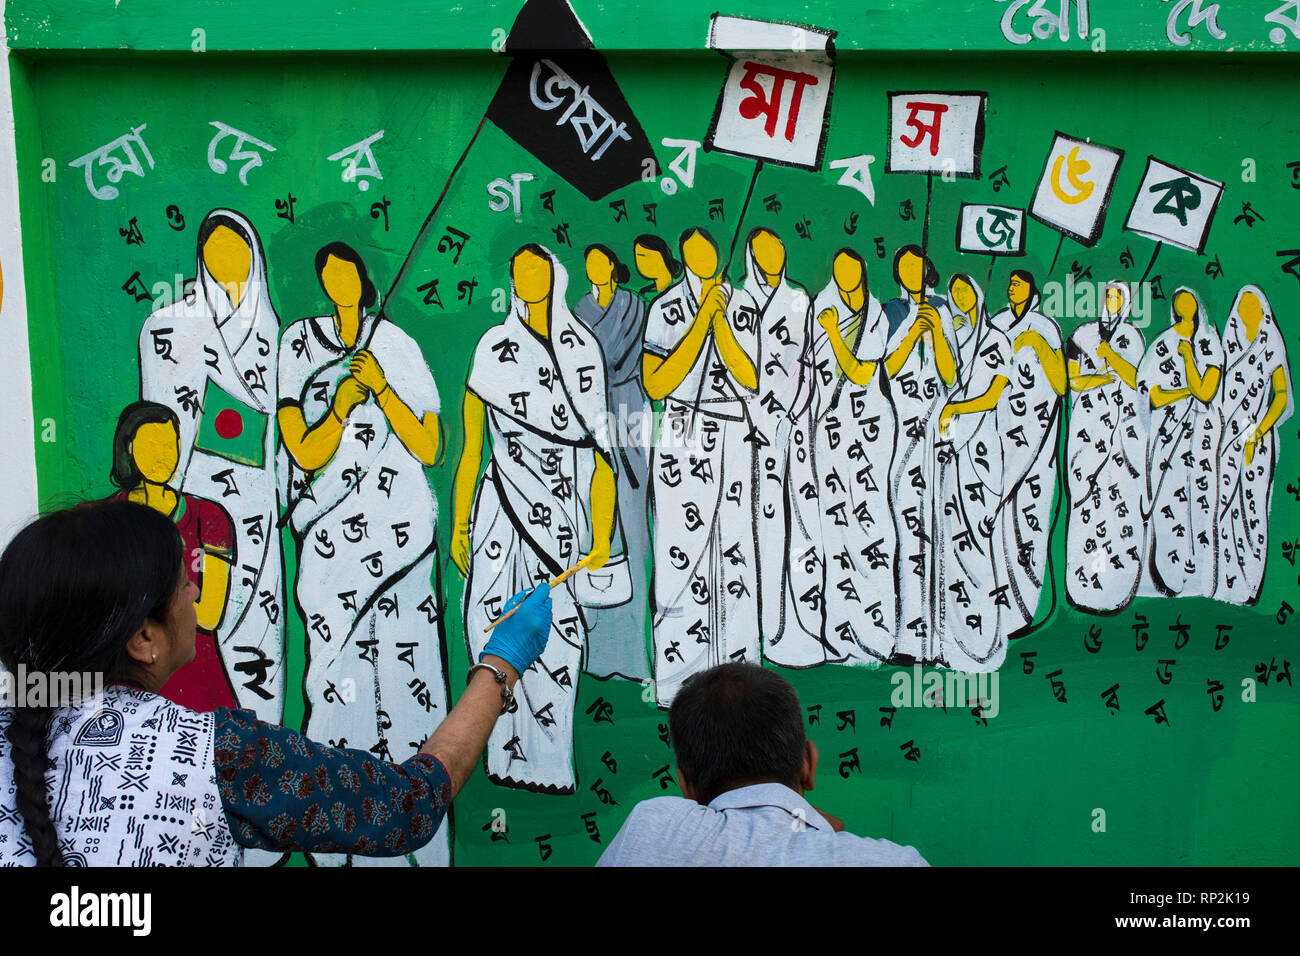 Dhaka, Bangladesh. 20th Feb, 2019.  Bangladeshi students paints on the wall as part of the decoration for the International Mother Language Day celebration in front of the language matyrs monument  in Dhaka, Bangladesh on February 20, 2019.  The nation will pay tribute to the Bangla language movement martyrs who sacrificed their life for their mother tongue in 1952, while the United Nations Educational Scientific and Cultural Organization (UNESCO) declared 21 February as the International Mother Language Day. Credit: zakir hossain chowdhury zakir/Alamy Live New Stock Photo